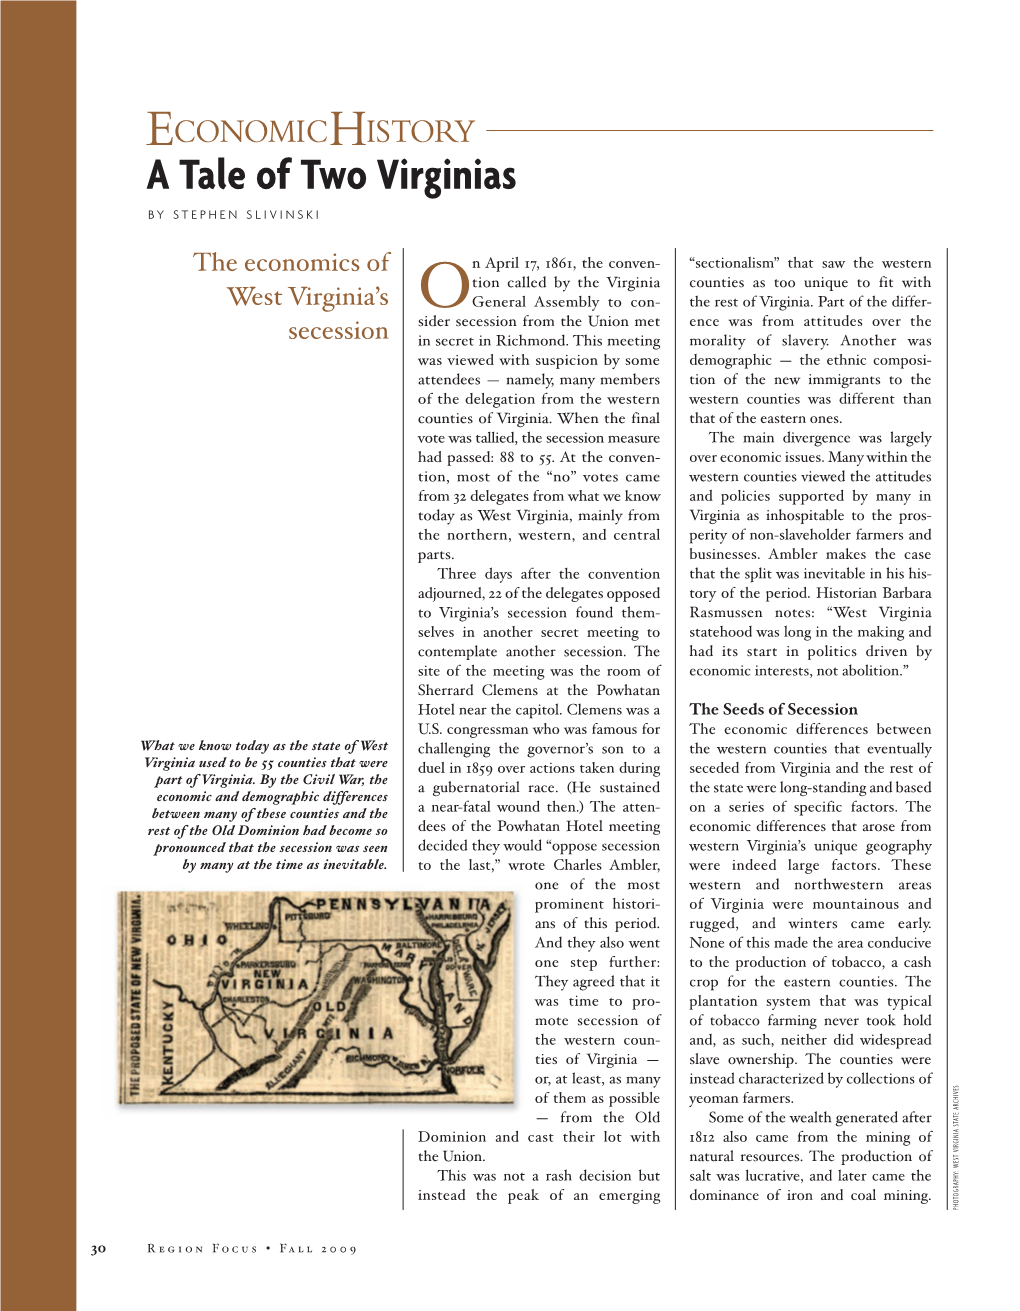 ECONOMICHISTORY a Tale of Two Virginias